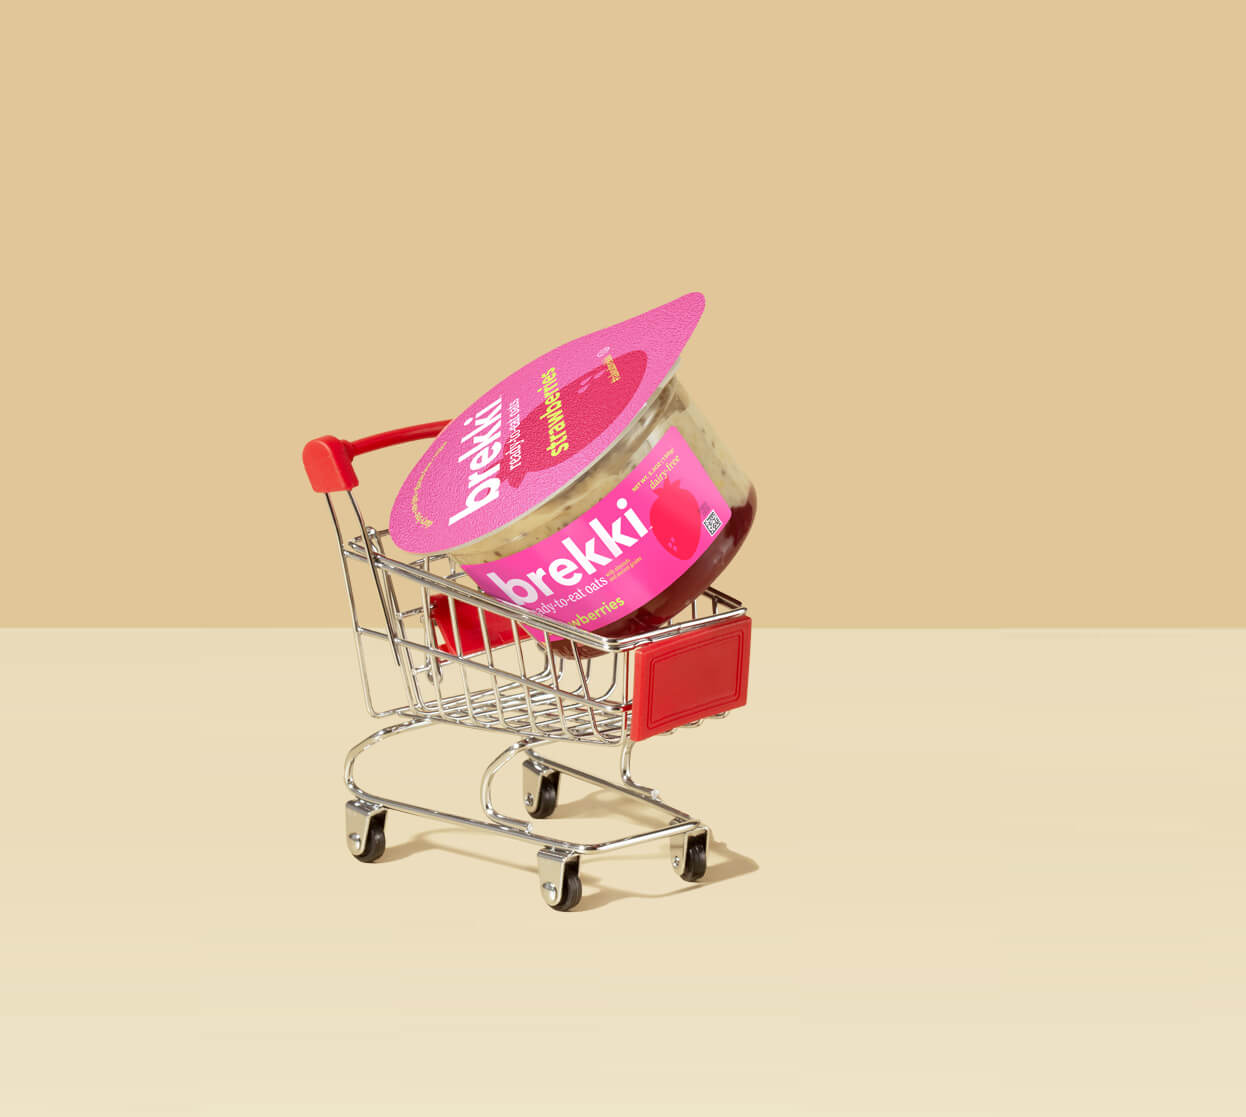 Container of brekki in a shopping cart